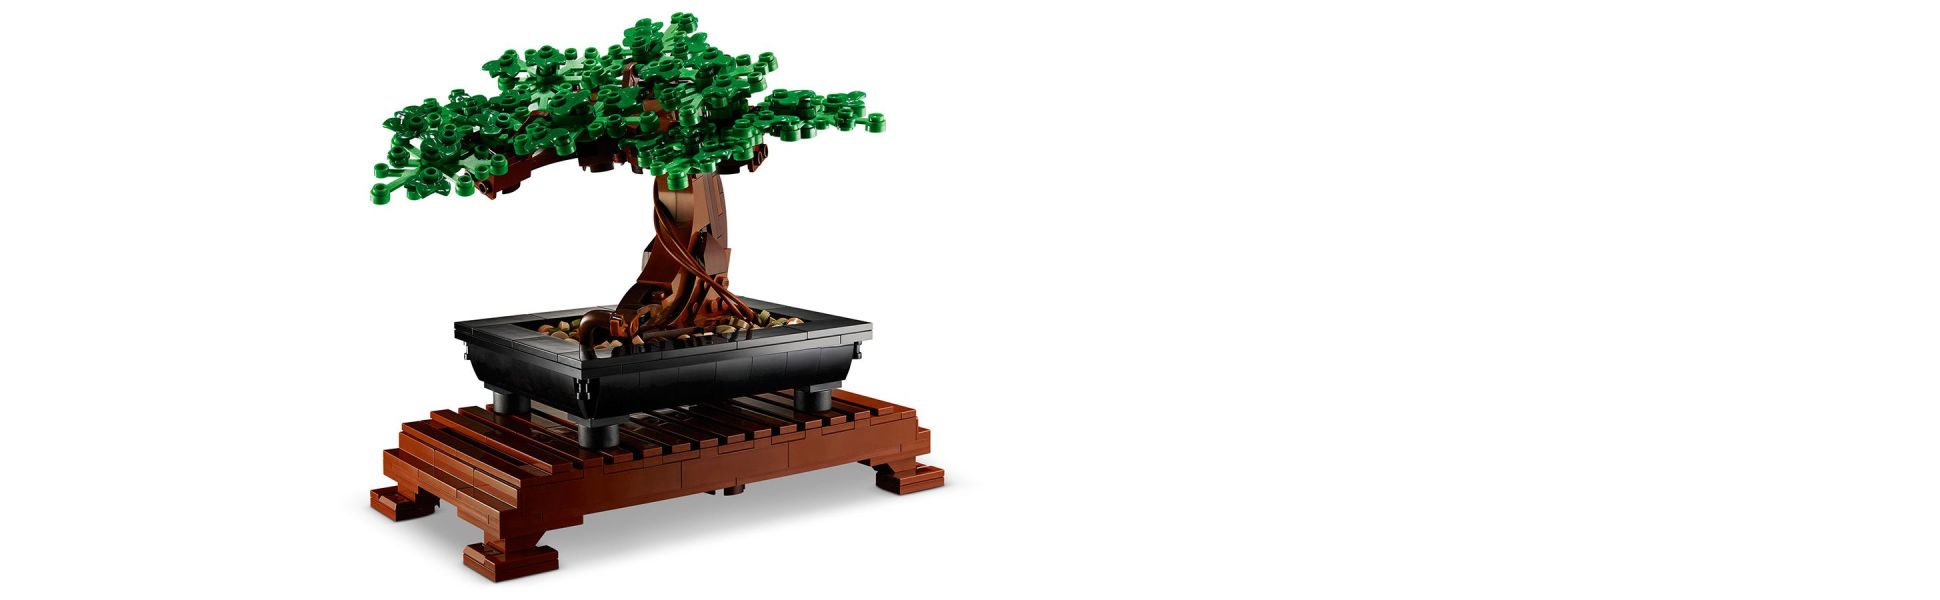 LEGO Icons Bonsai Tree with Cherry Blossom Flowers, DIY Plant Model for  Home Décor or Office Art, Unique Gift for Valentines Day for Him or Her, Botanical  Collection Building Set for Adults